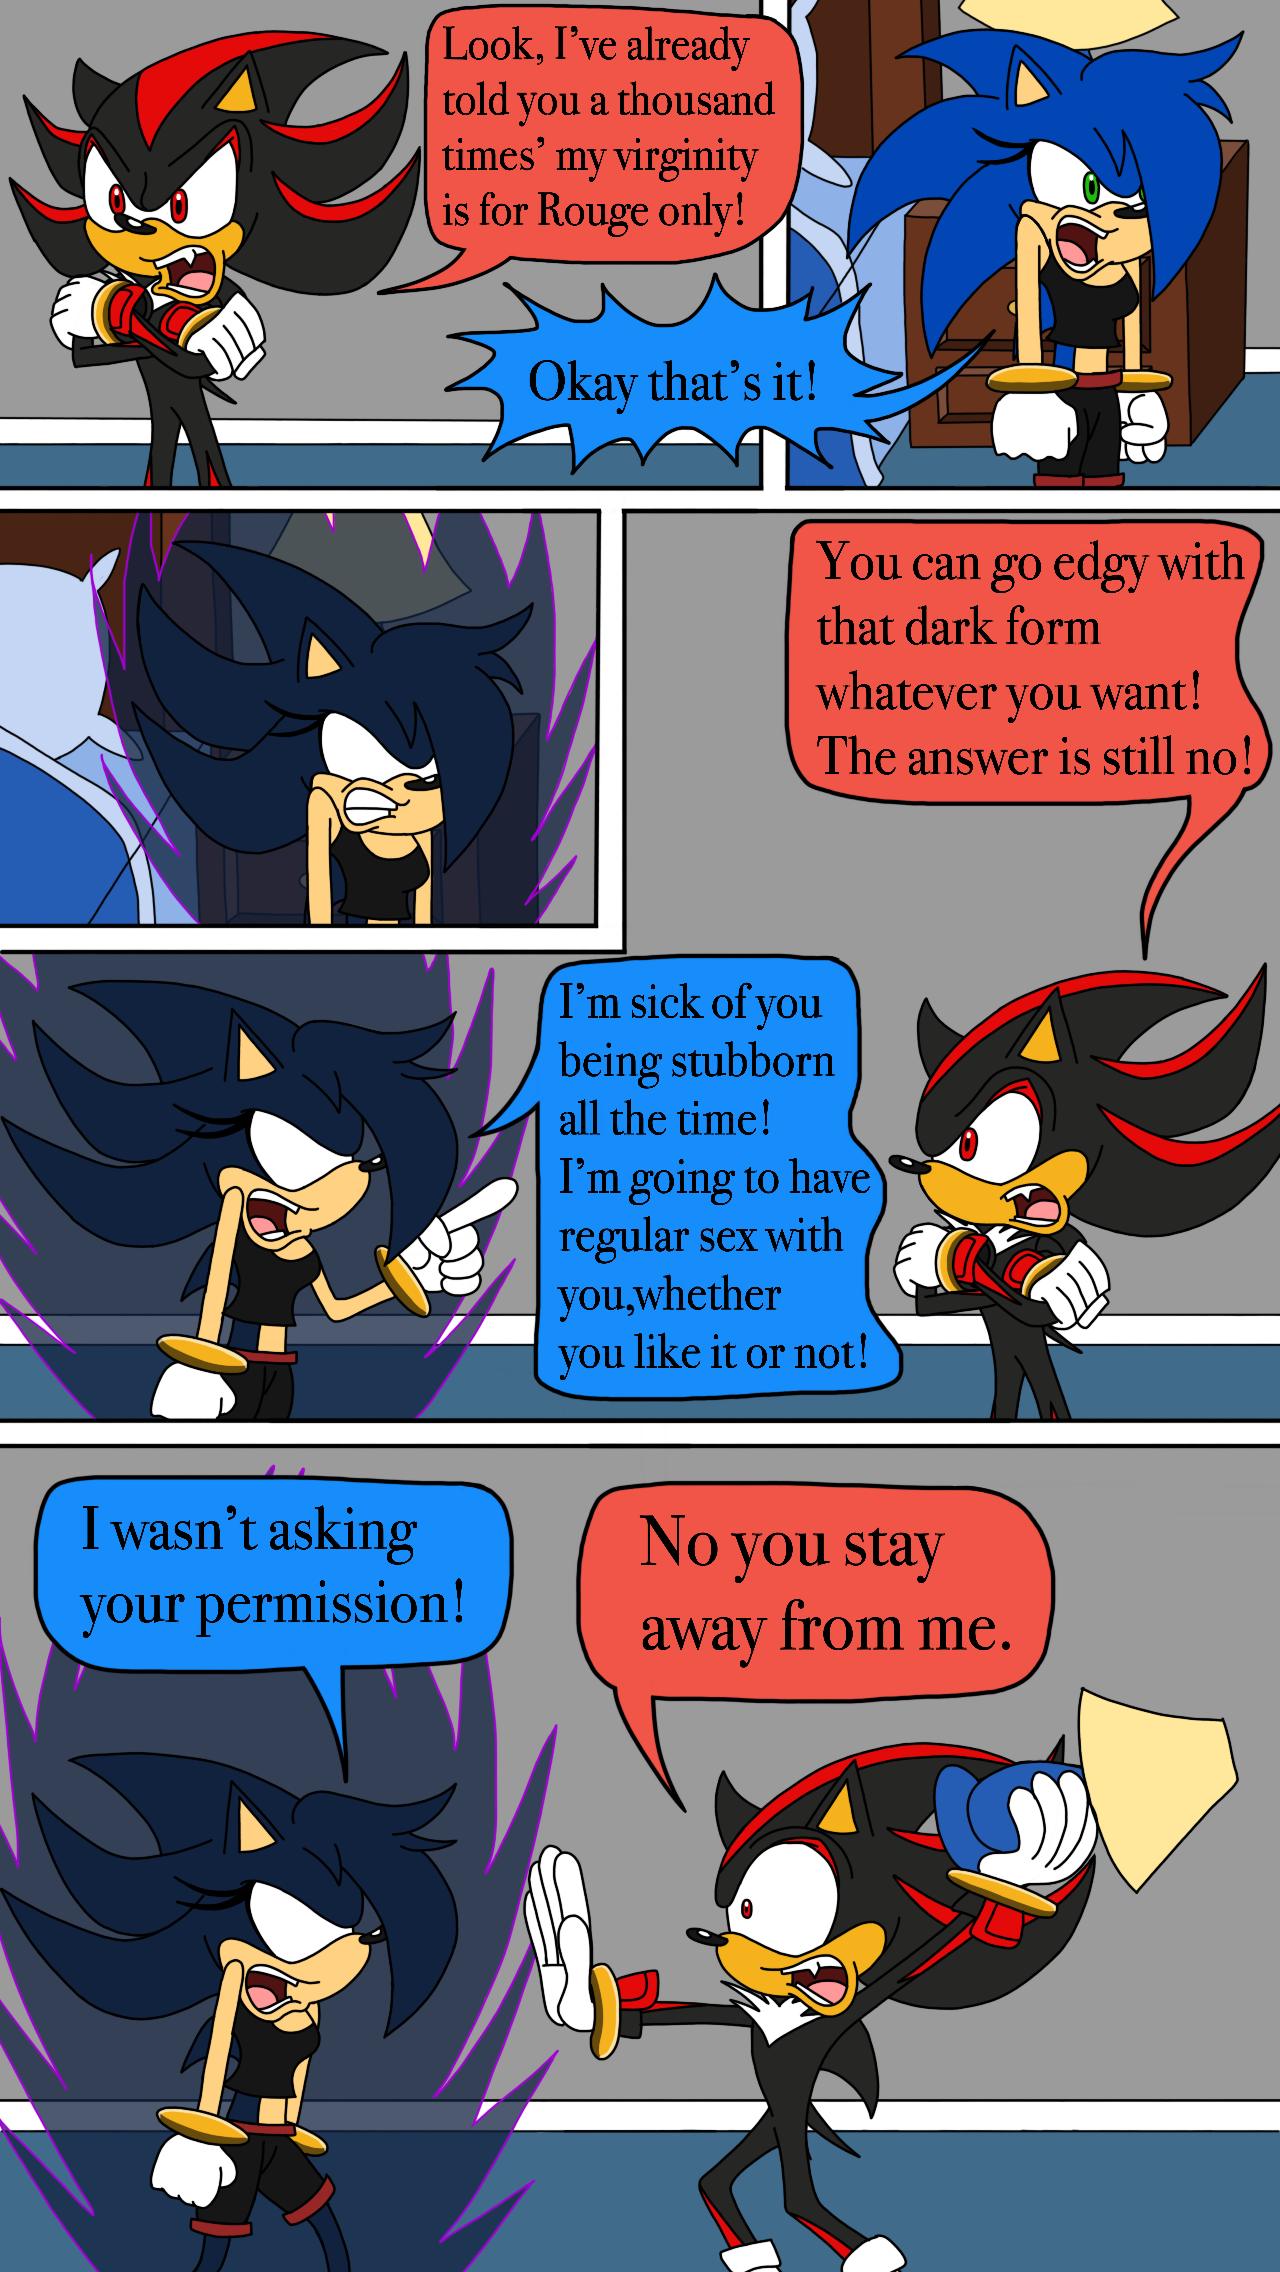 Sonic exe and Sonica exe (short Comic) by Darkness9000A on DeviantArt